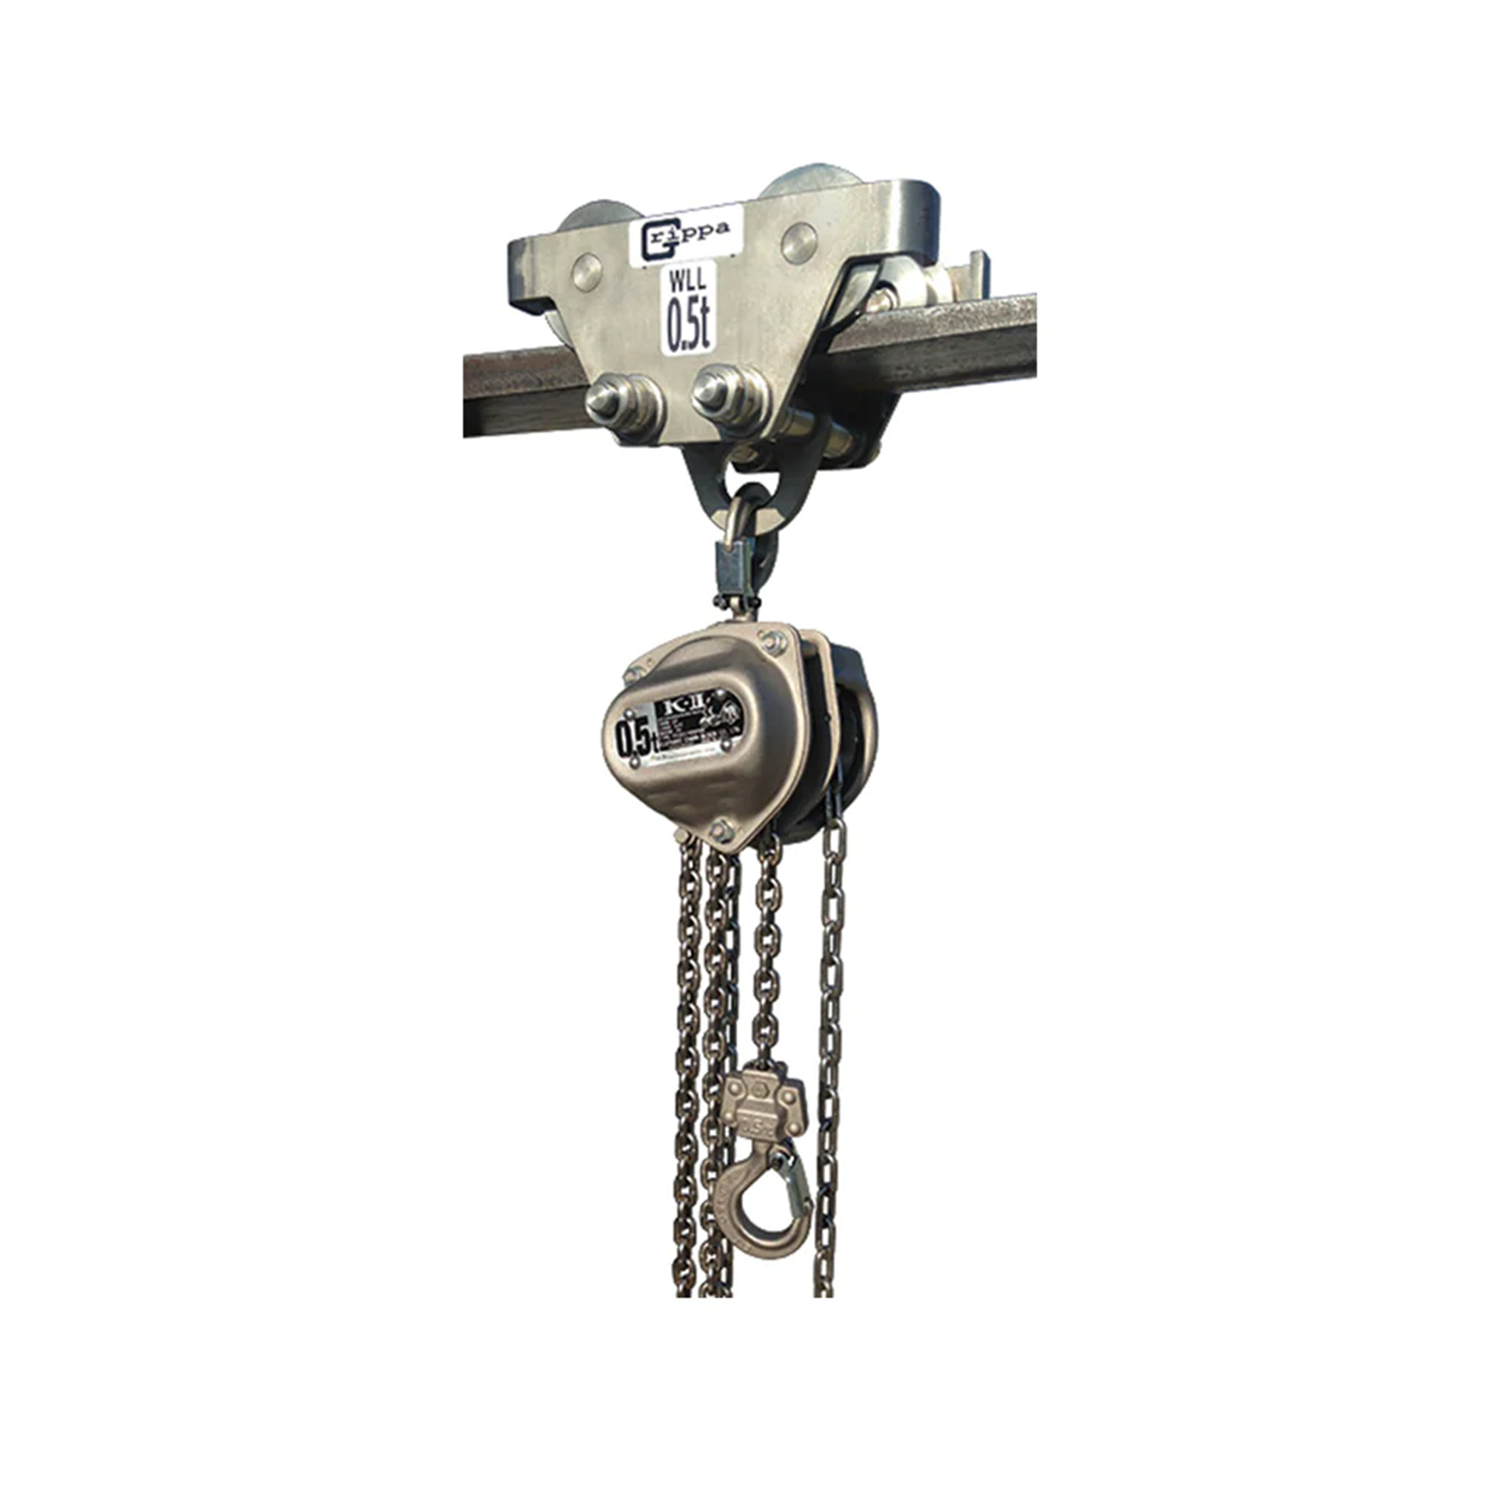 Non-Corrosive/Explosion Proof/Atex Rated Hoists